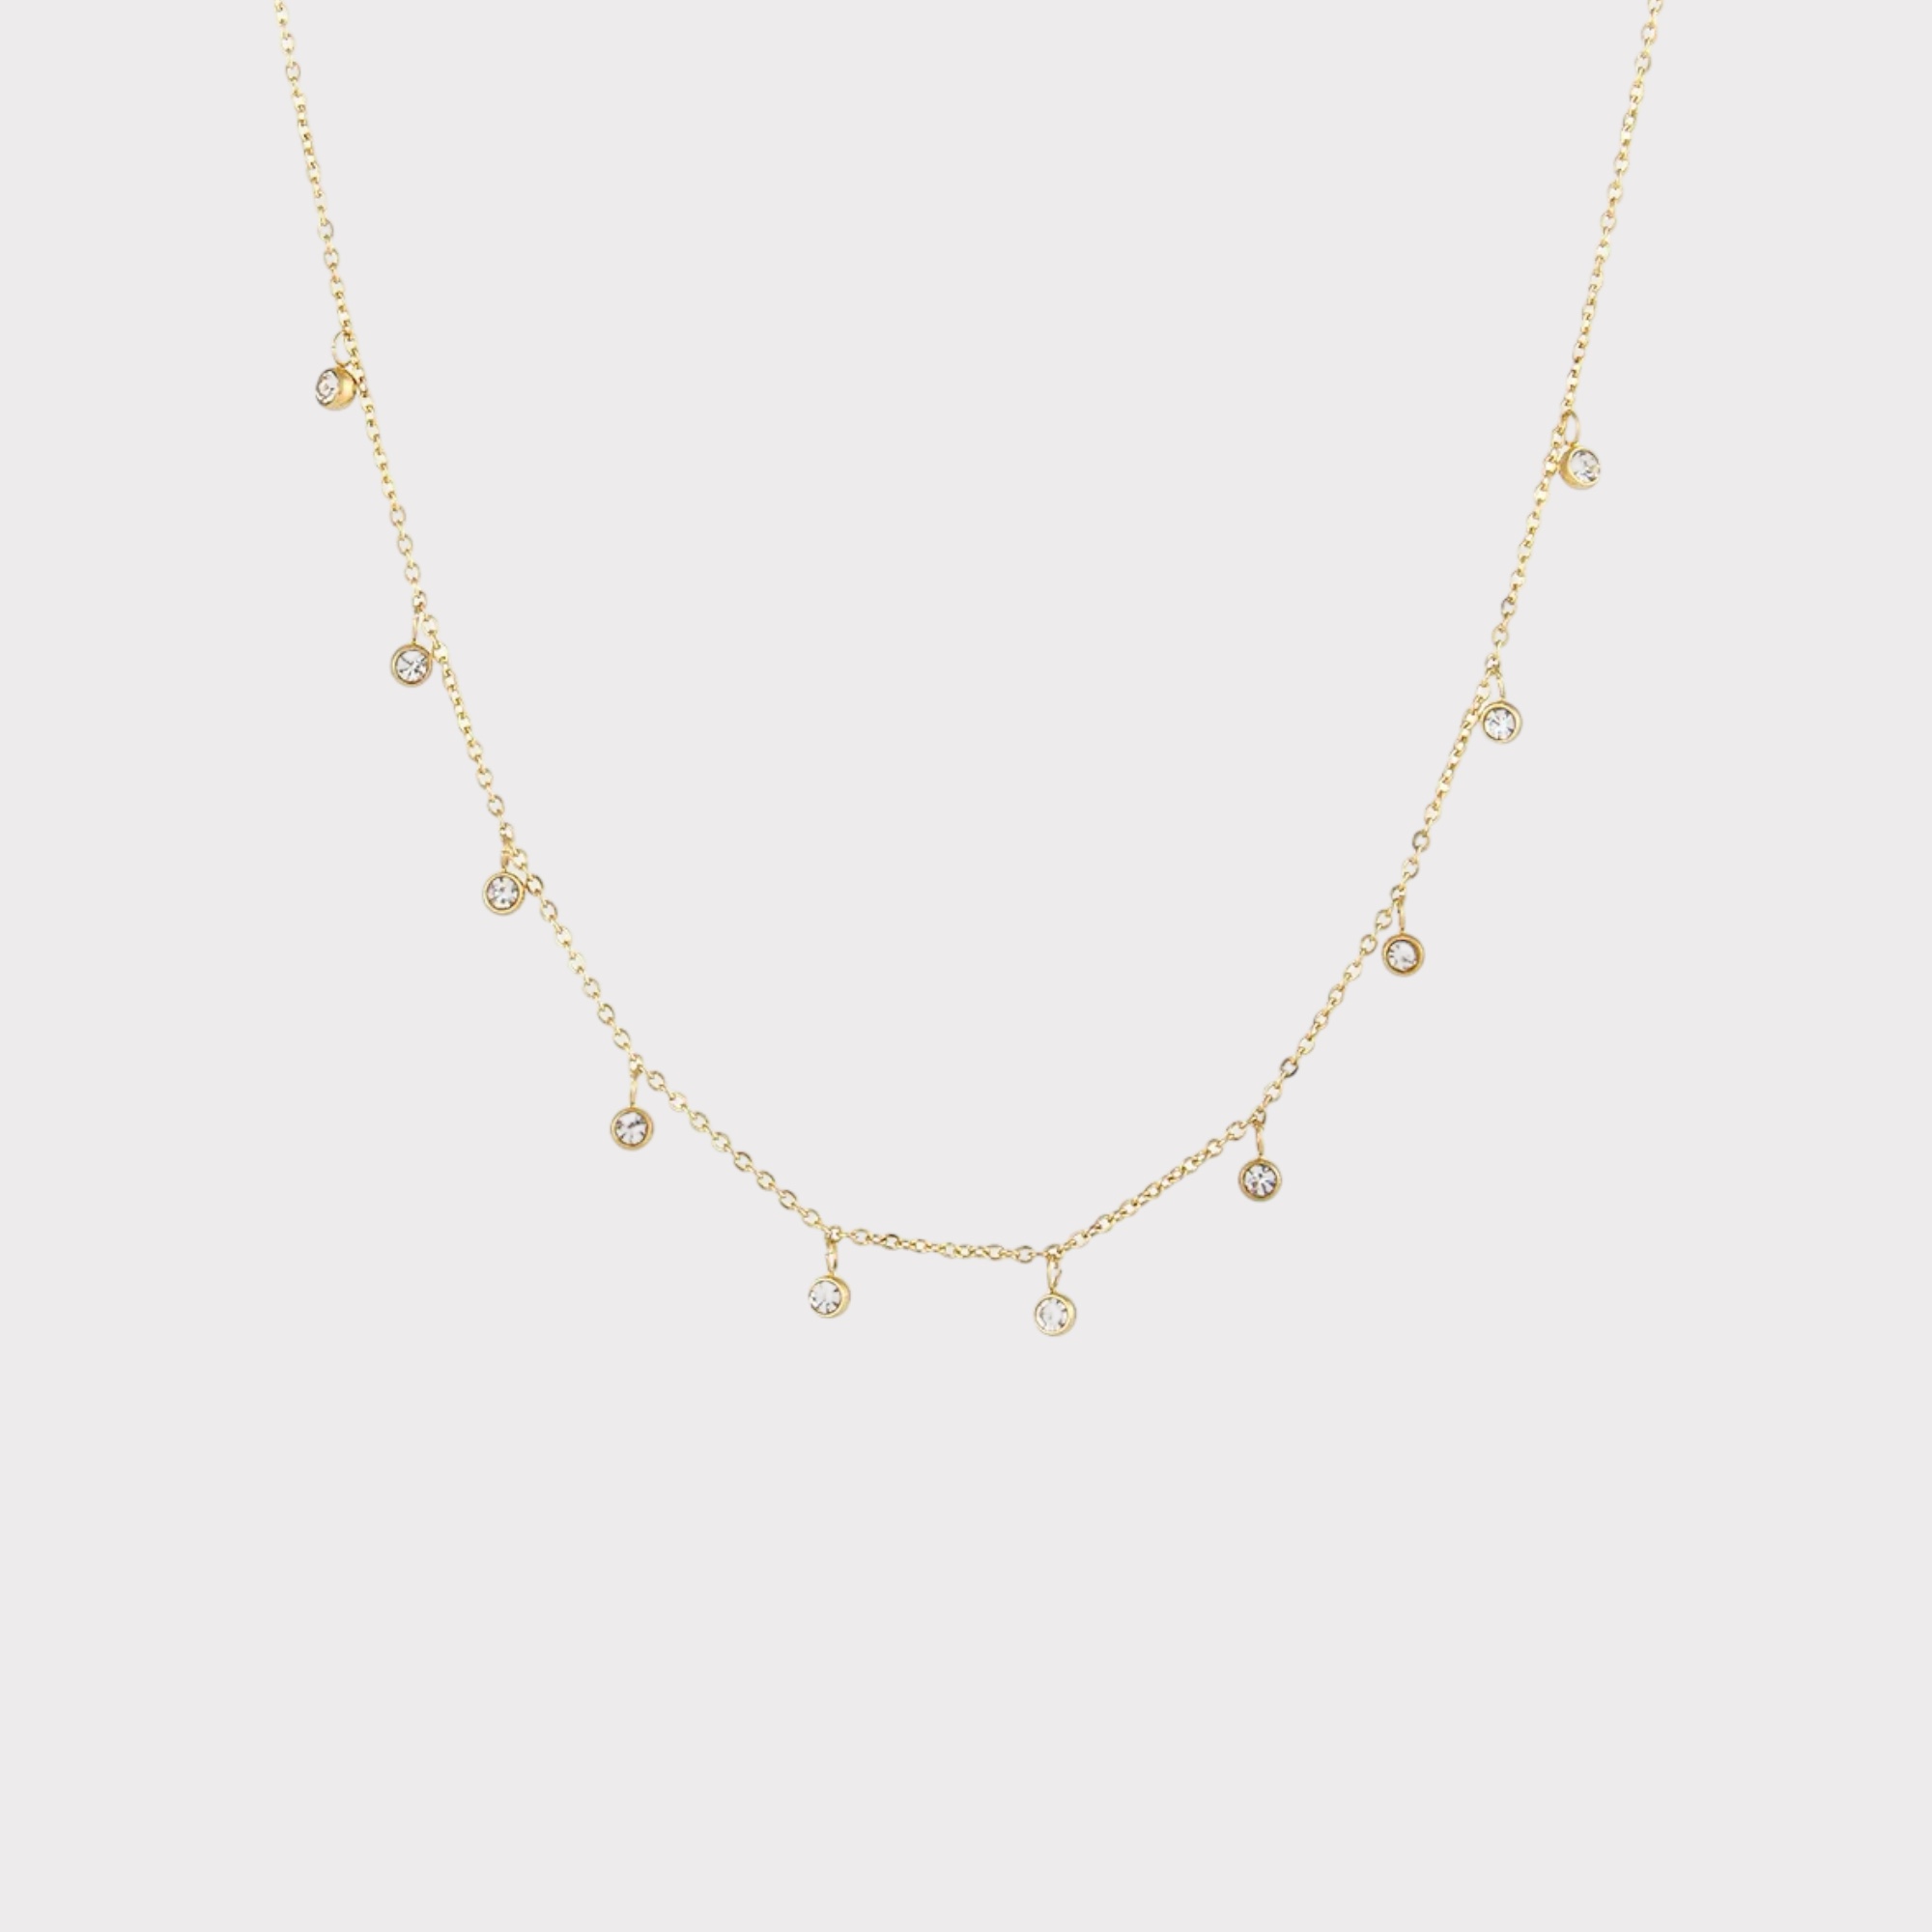 Celestial Light Gold Chain Necklace with Cubic Zirconia